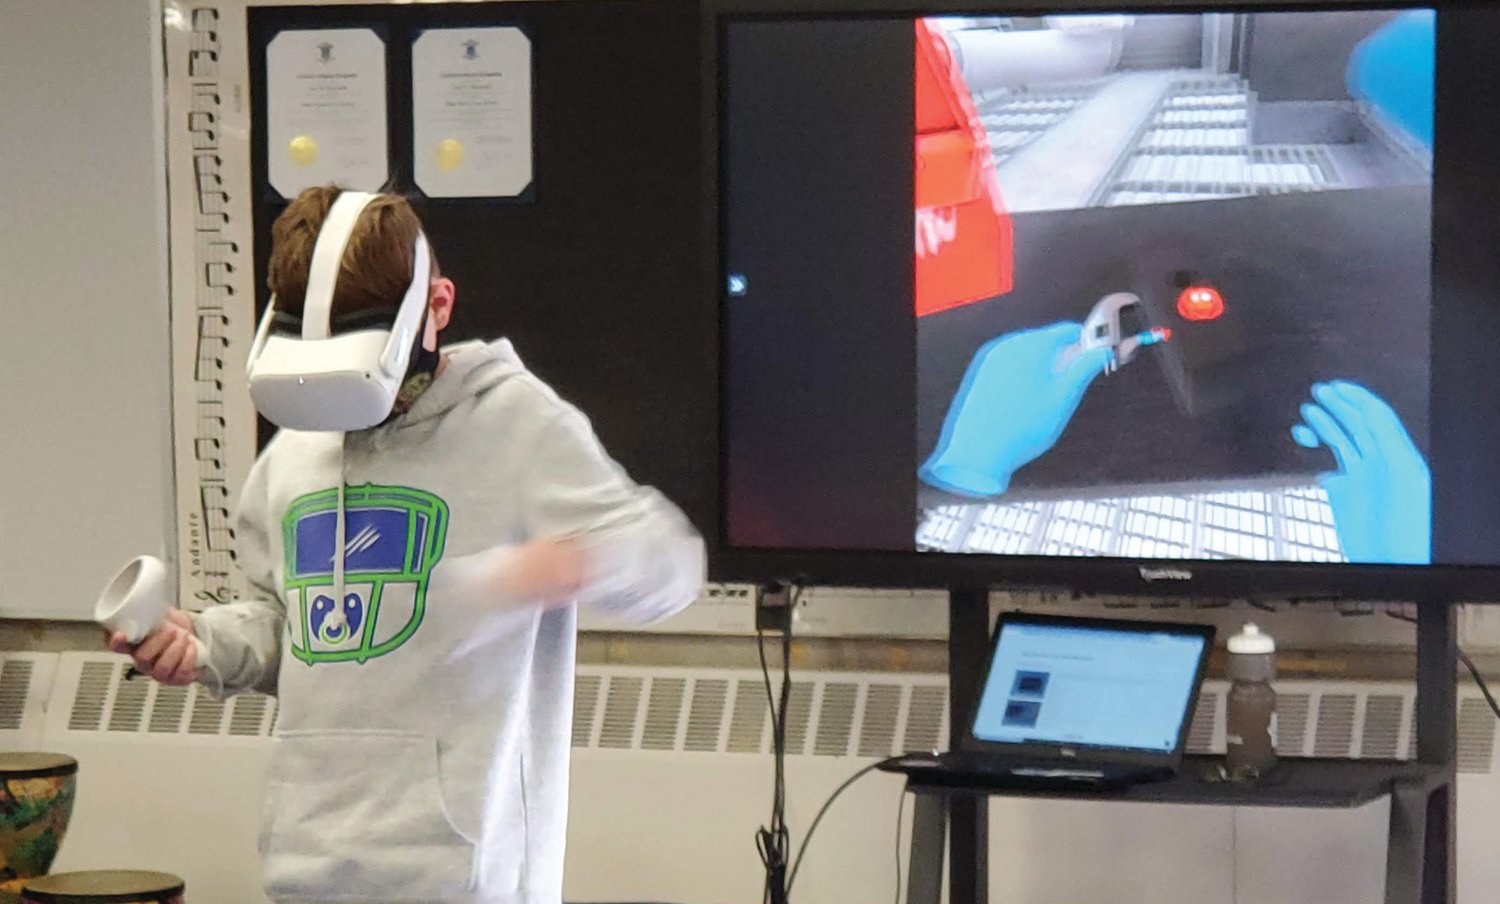 THE OTHER VIRTUAL LEARNING: A Scituate student adjusts a machine in a virtual reality environment. The Scituate Career & Technology Education program uses virtual reality and GIS technology to help students explore potential career options.